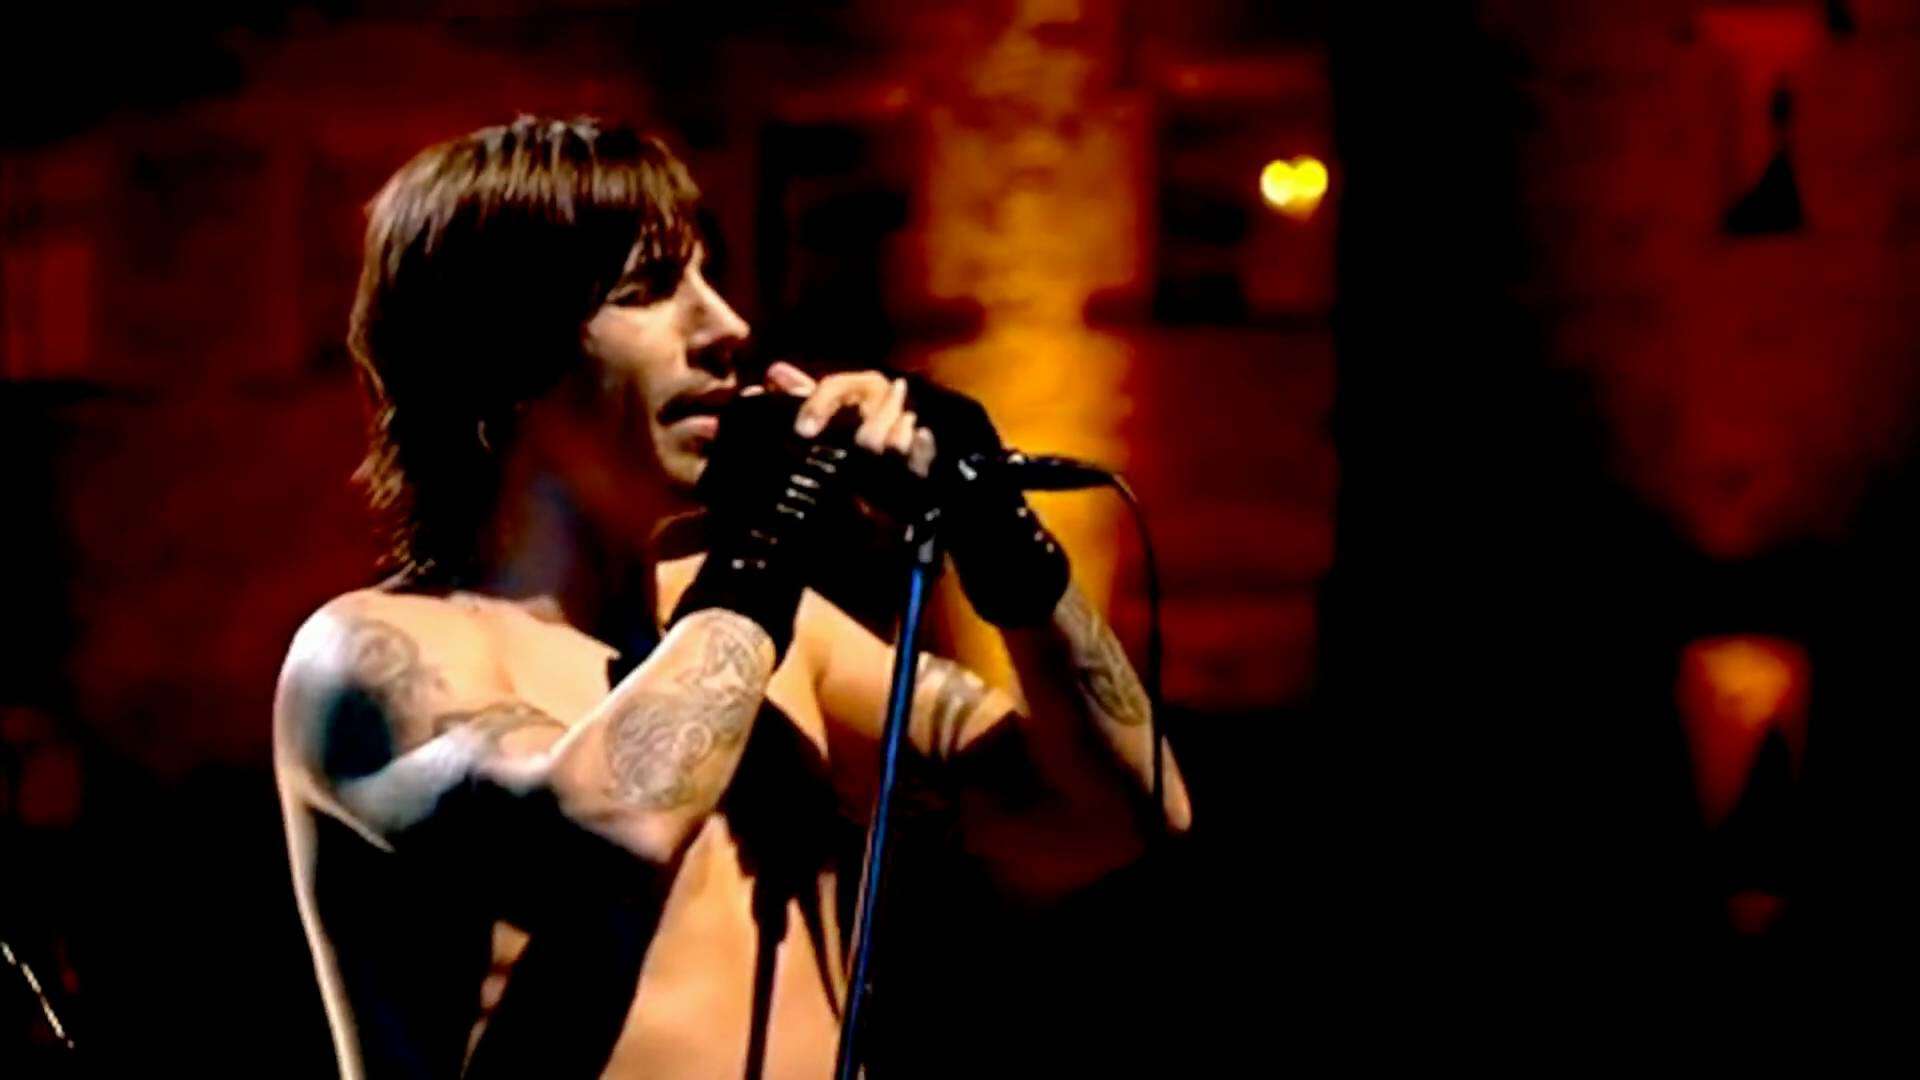 Red Hot Chili Peppers - Under the Bridge (Live at Slane Castle) photo